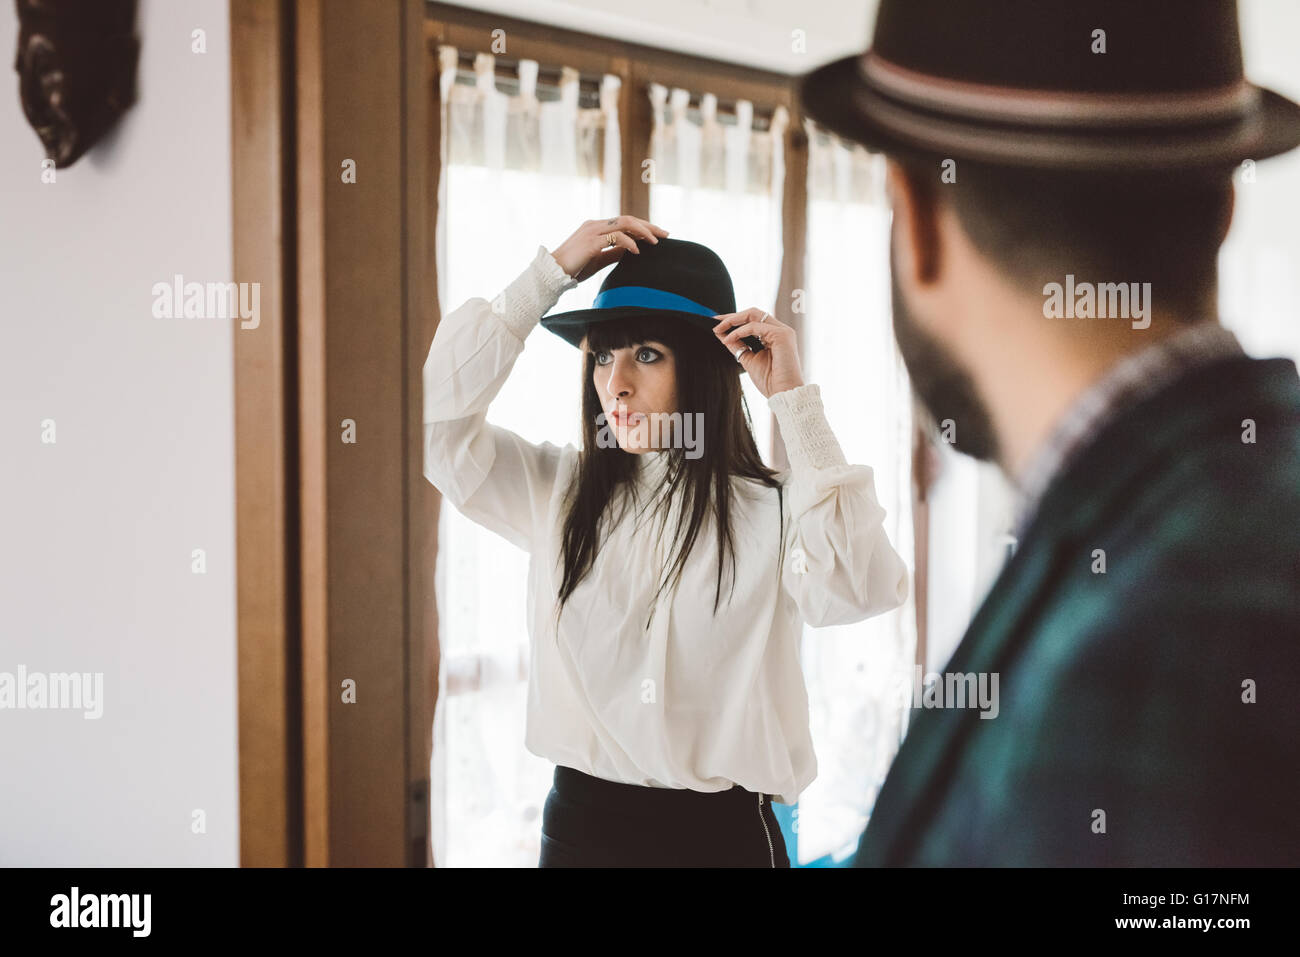 Young man waiting for woman trying on hat Stock Photo